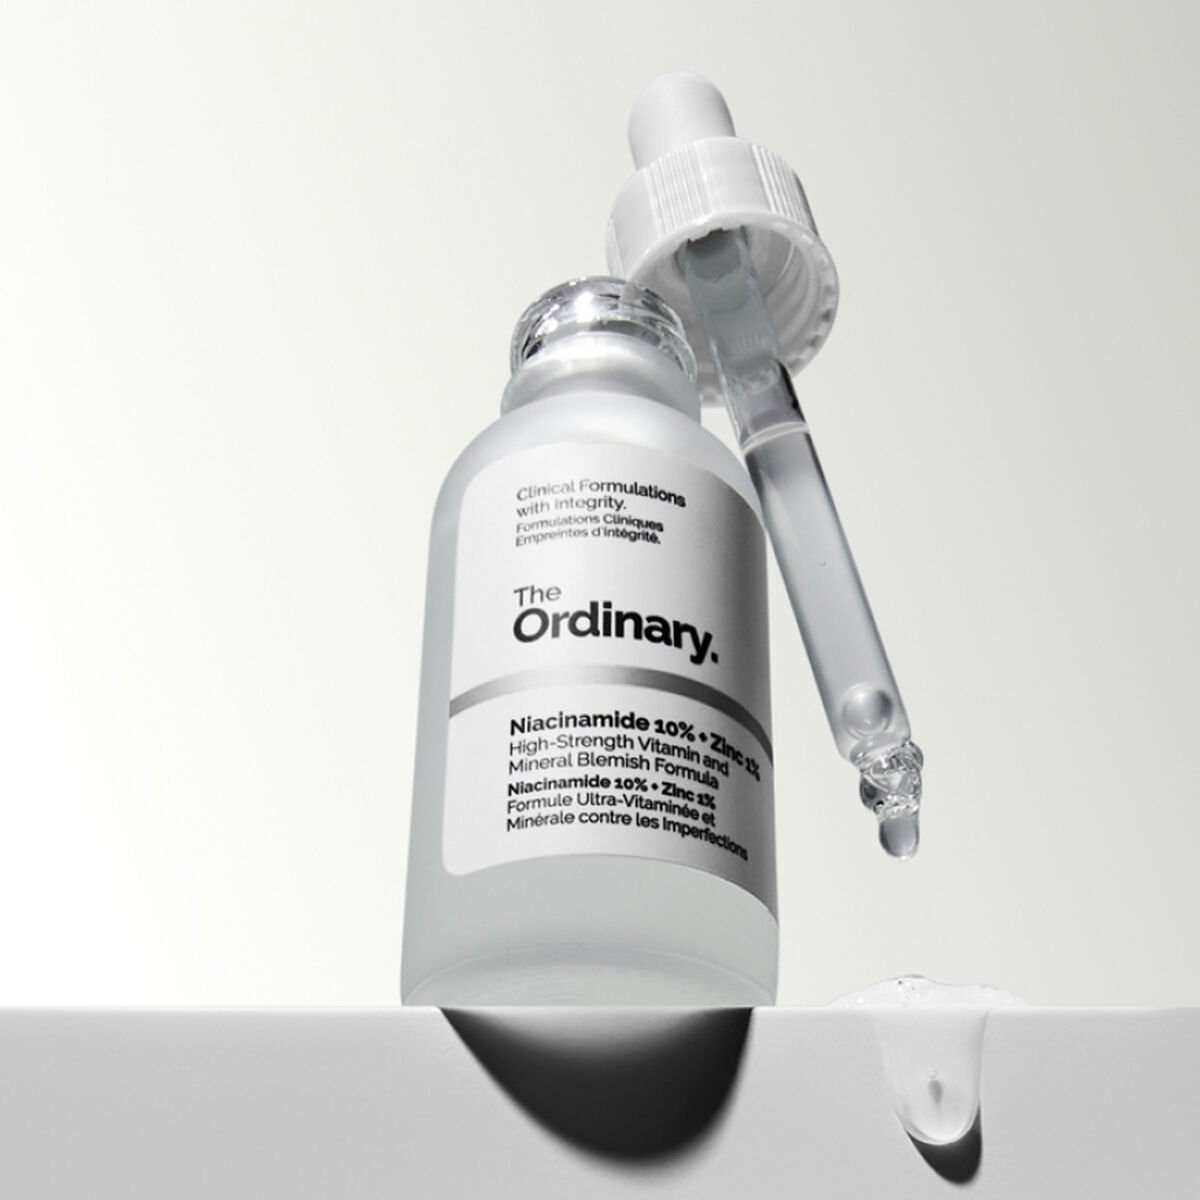 The Ordinary Niacinamide 10% + Zinc 1% 30ml for acne and pores, for refined skin texture, balanced complexion, and reduced blemishes